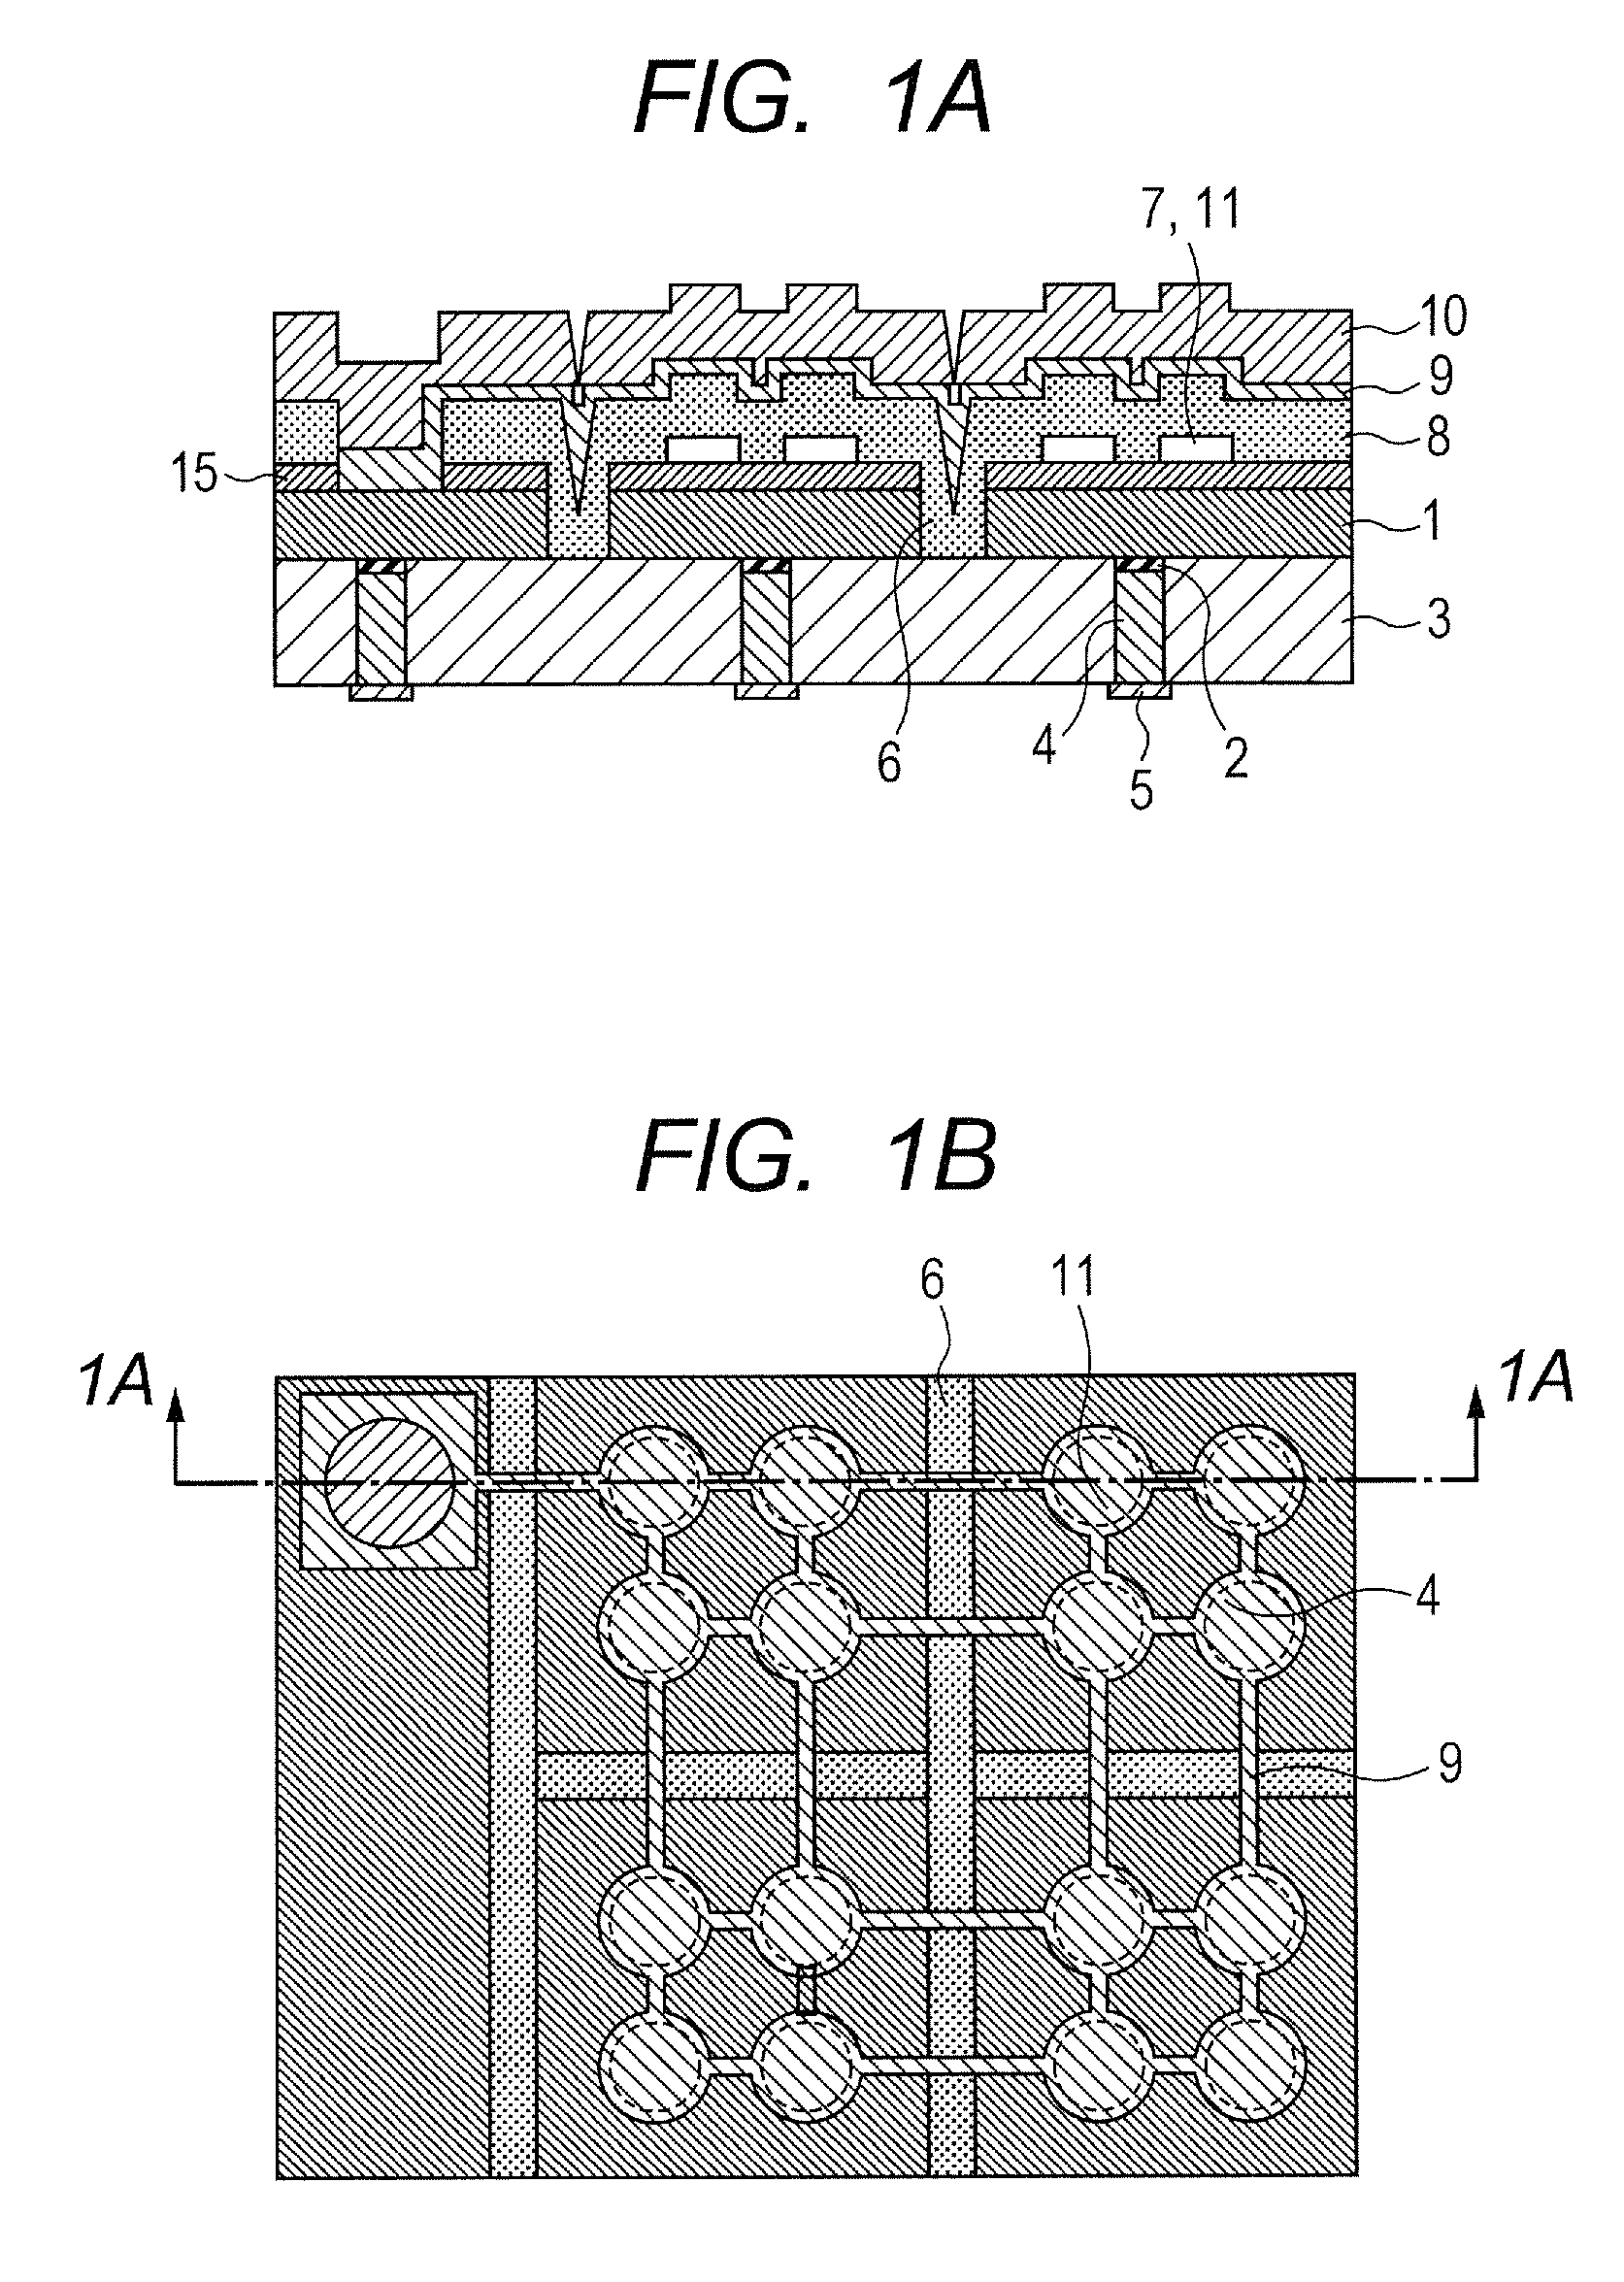 Method for manufacturing an electromechanical transducer